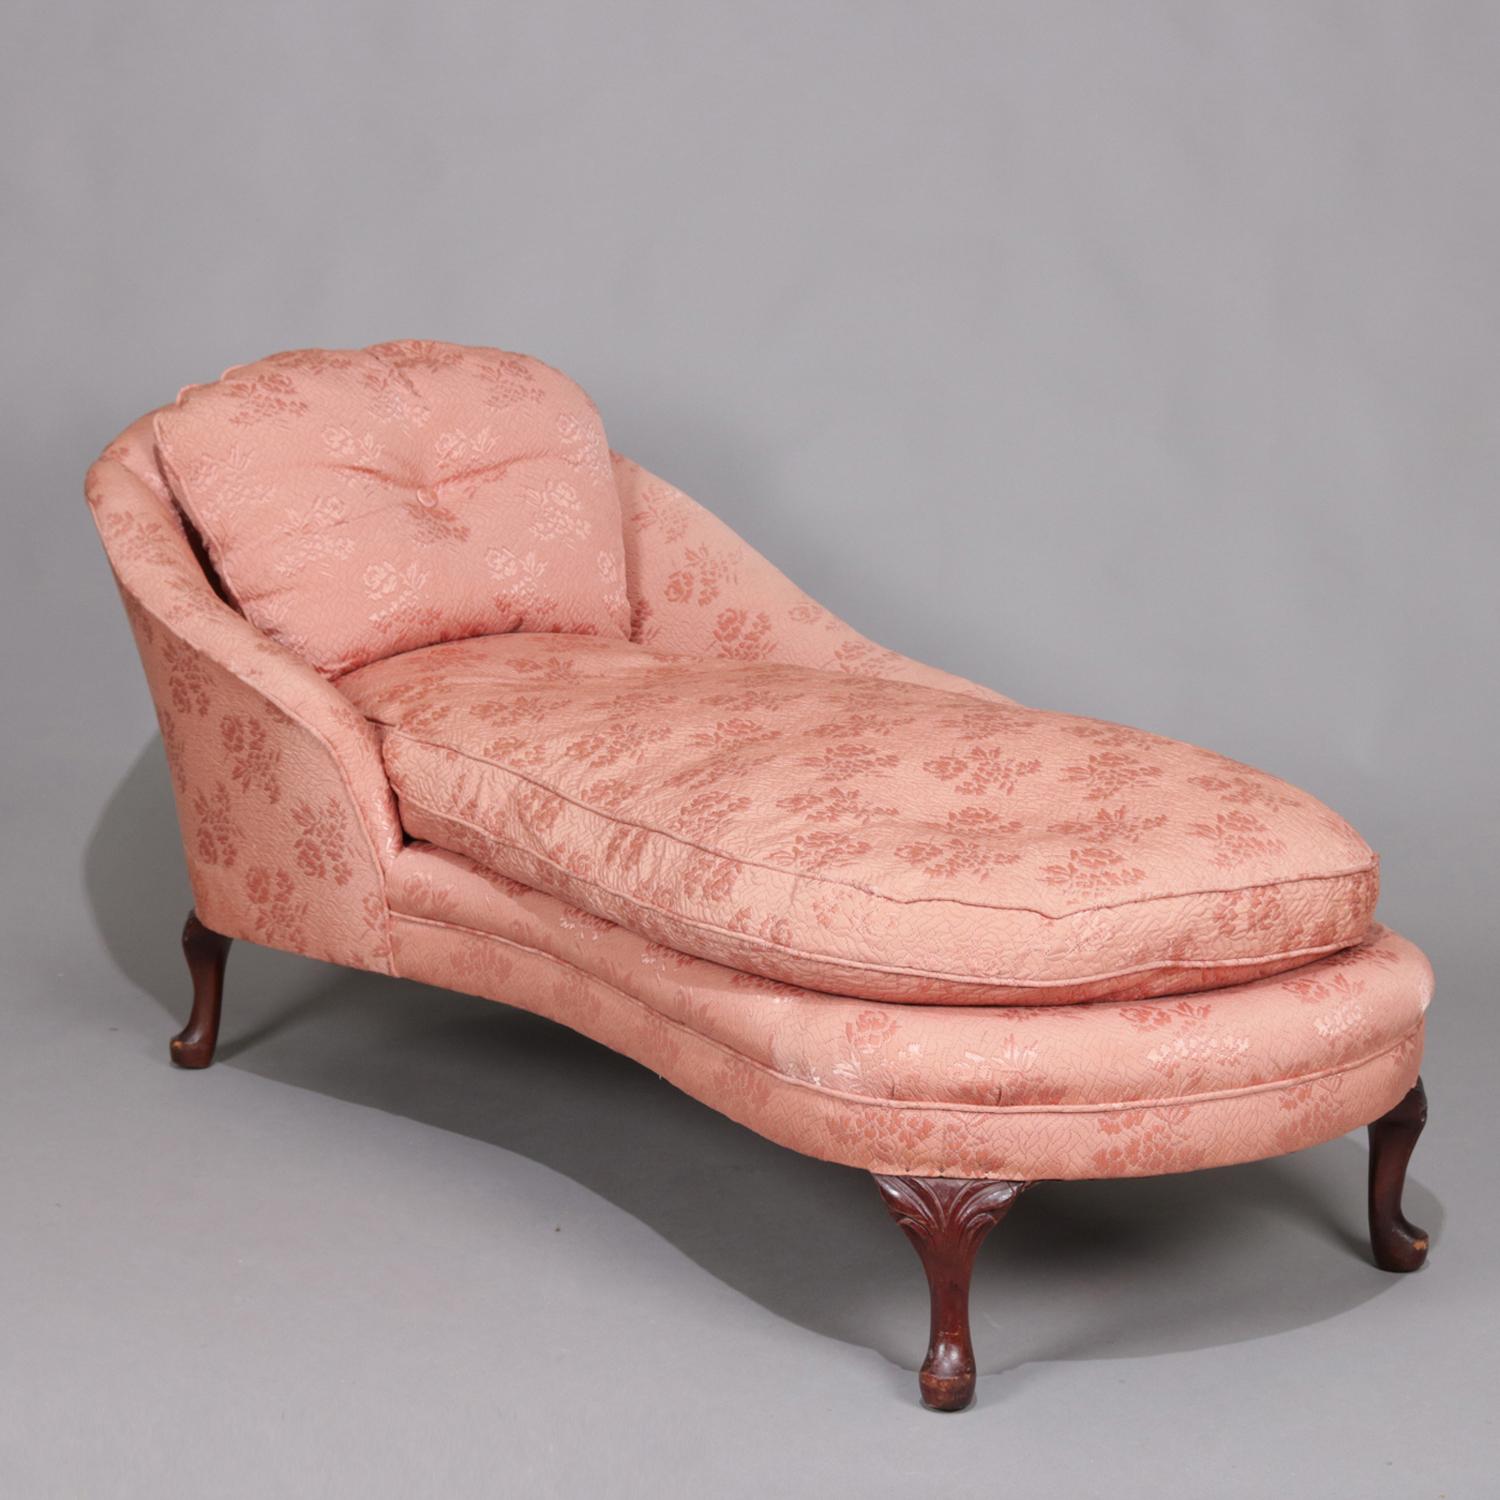 Antique French Art Deco style recamier features asymmetrical and tapered arms with buttoned back pillow, upholstered and raised on carved mahogany Queen Anne style legs, circa 1920

Measures: 29